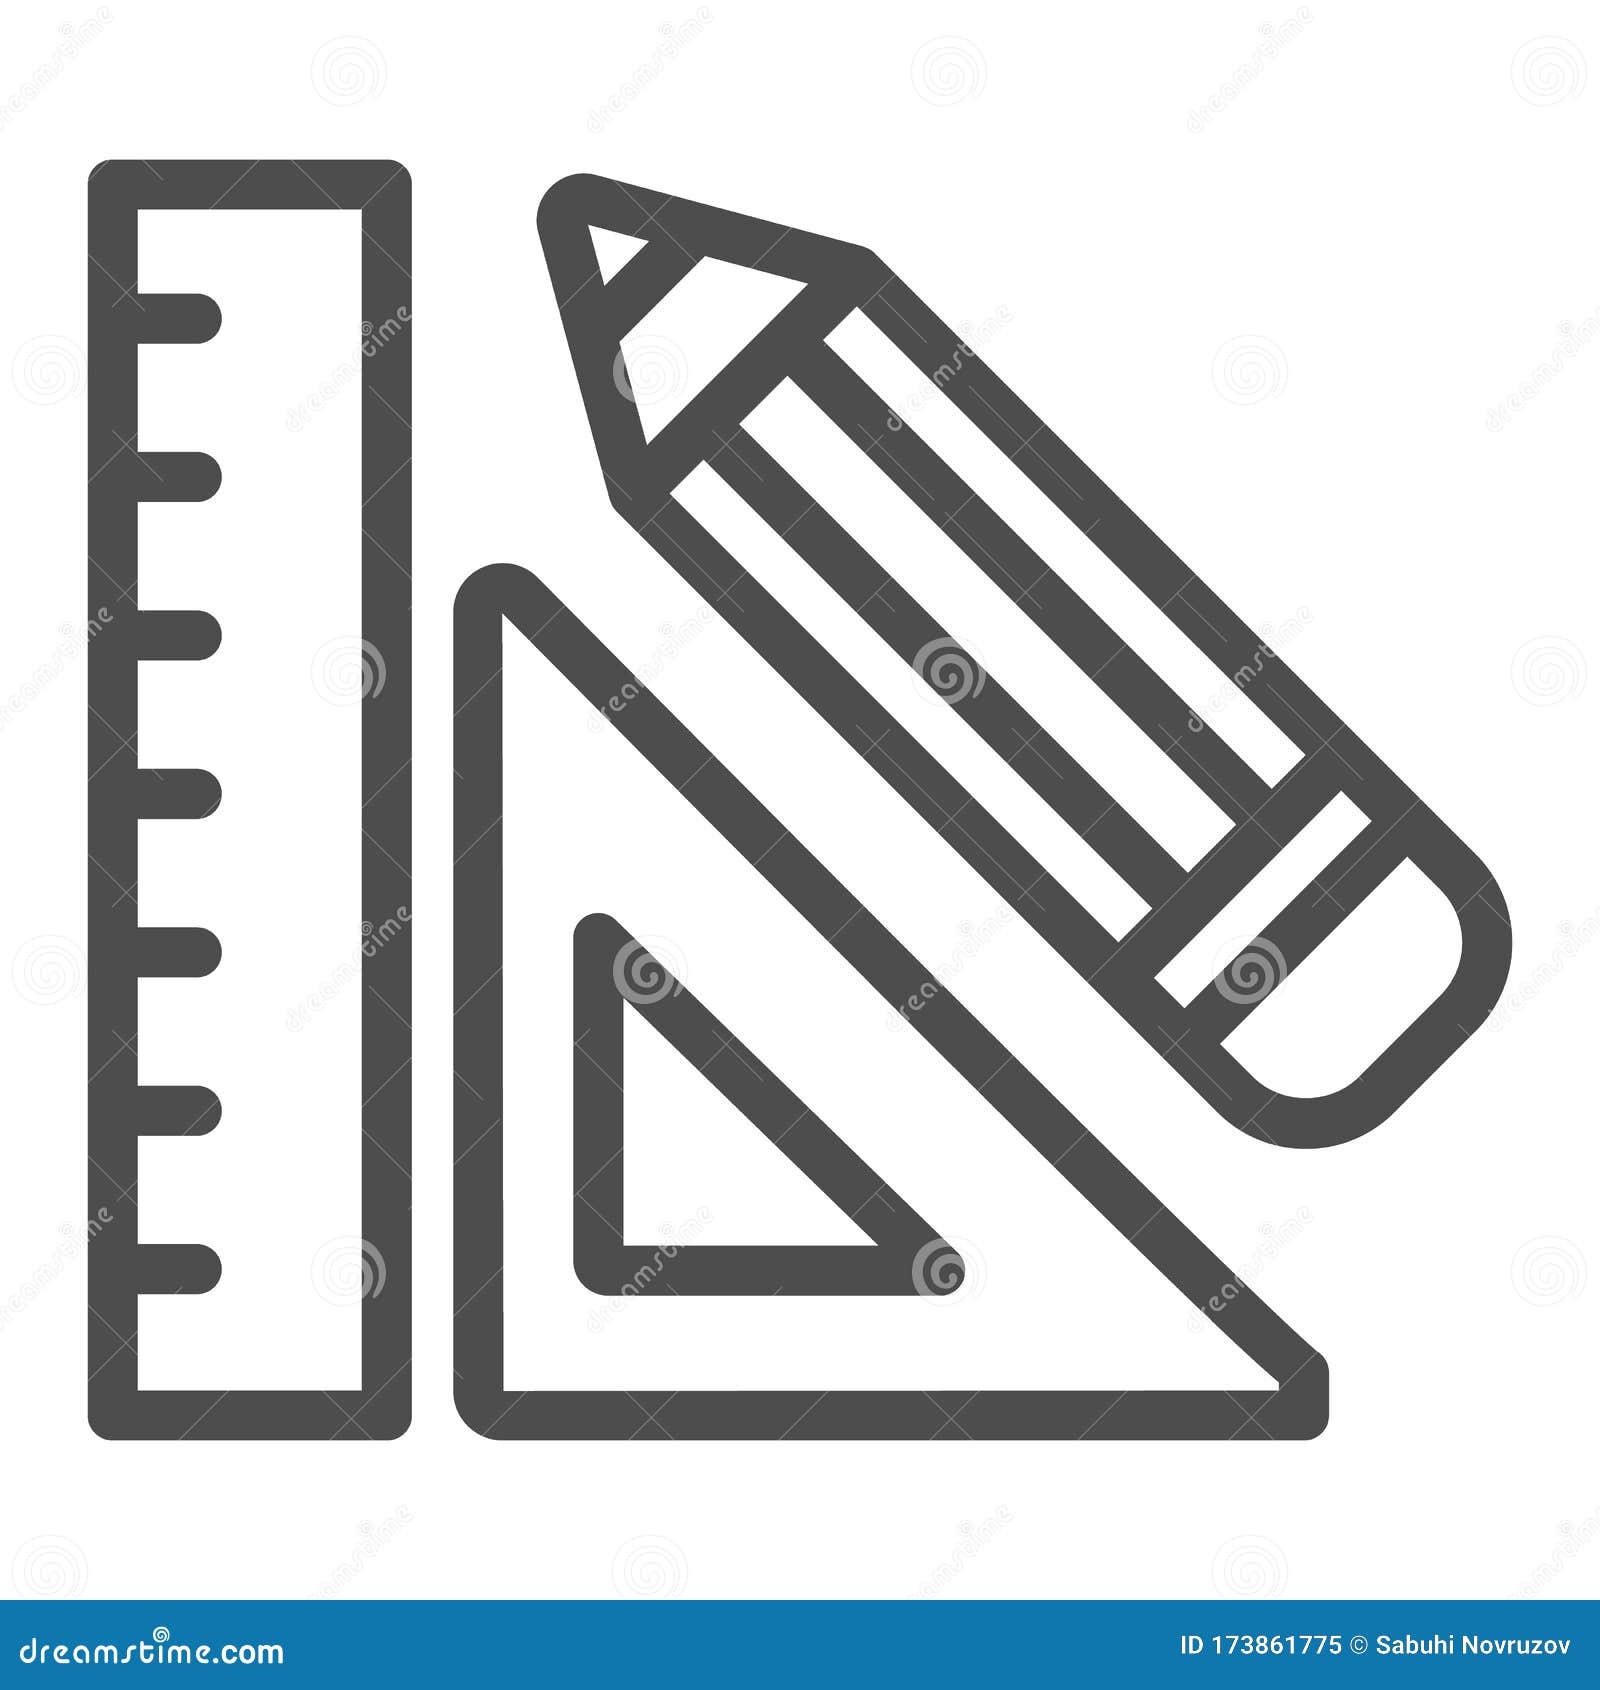 Ruler and Pencil Line Icon. Drawing Math Tools, Classic School